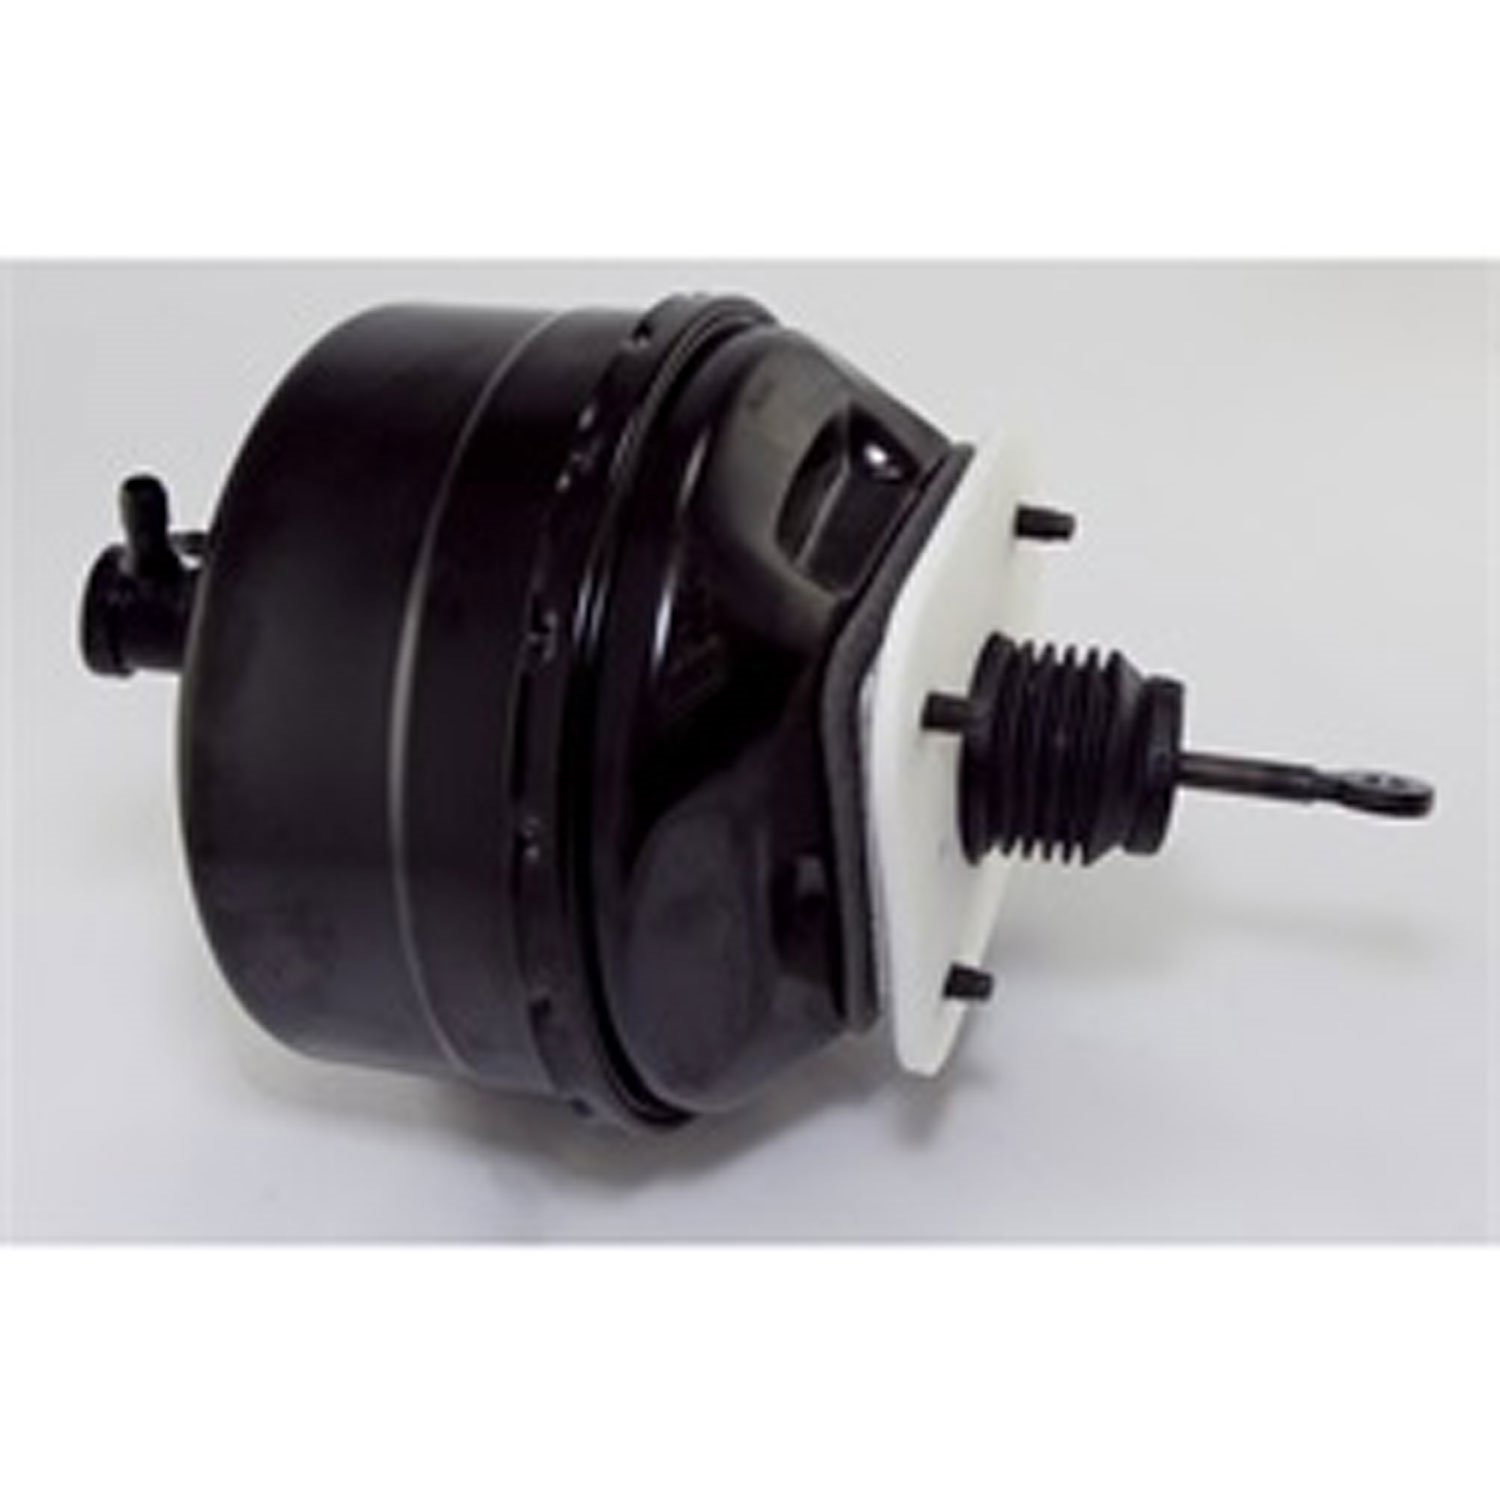 This power brake booster from Omix-ADA fits 95-98 Jeep Grand Cherokees.